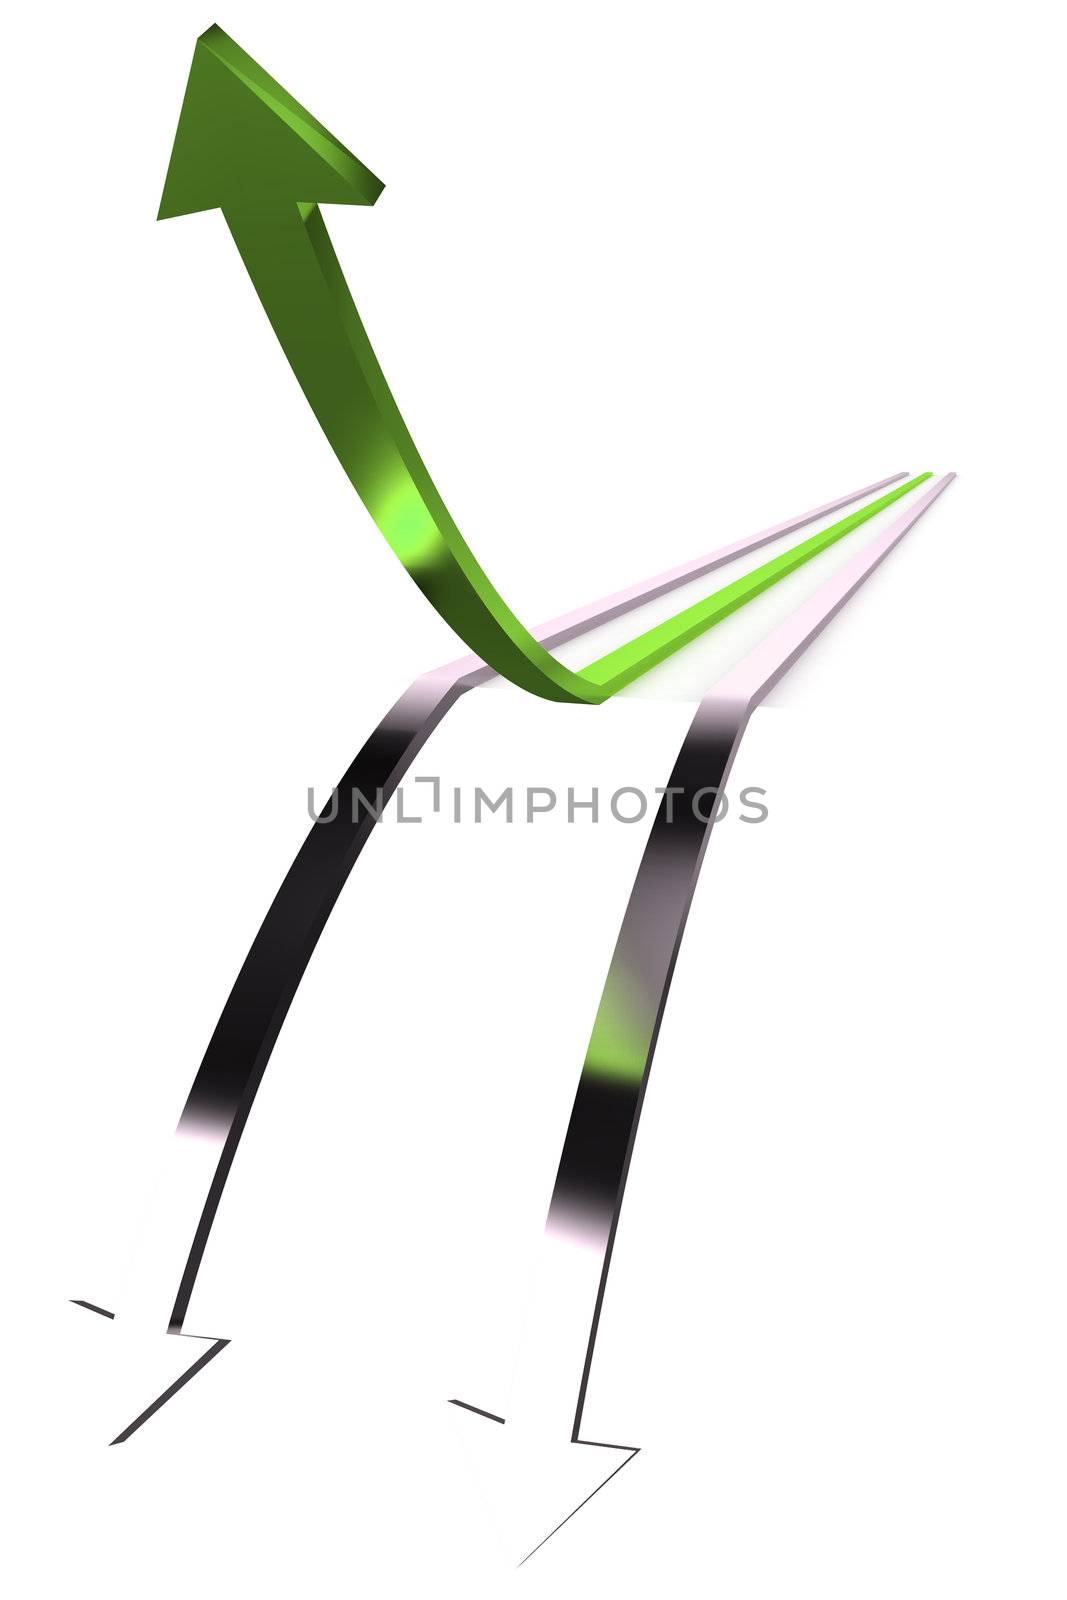 A Colourful 3d Rendered Success Arrow Illustration